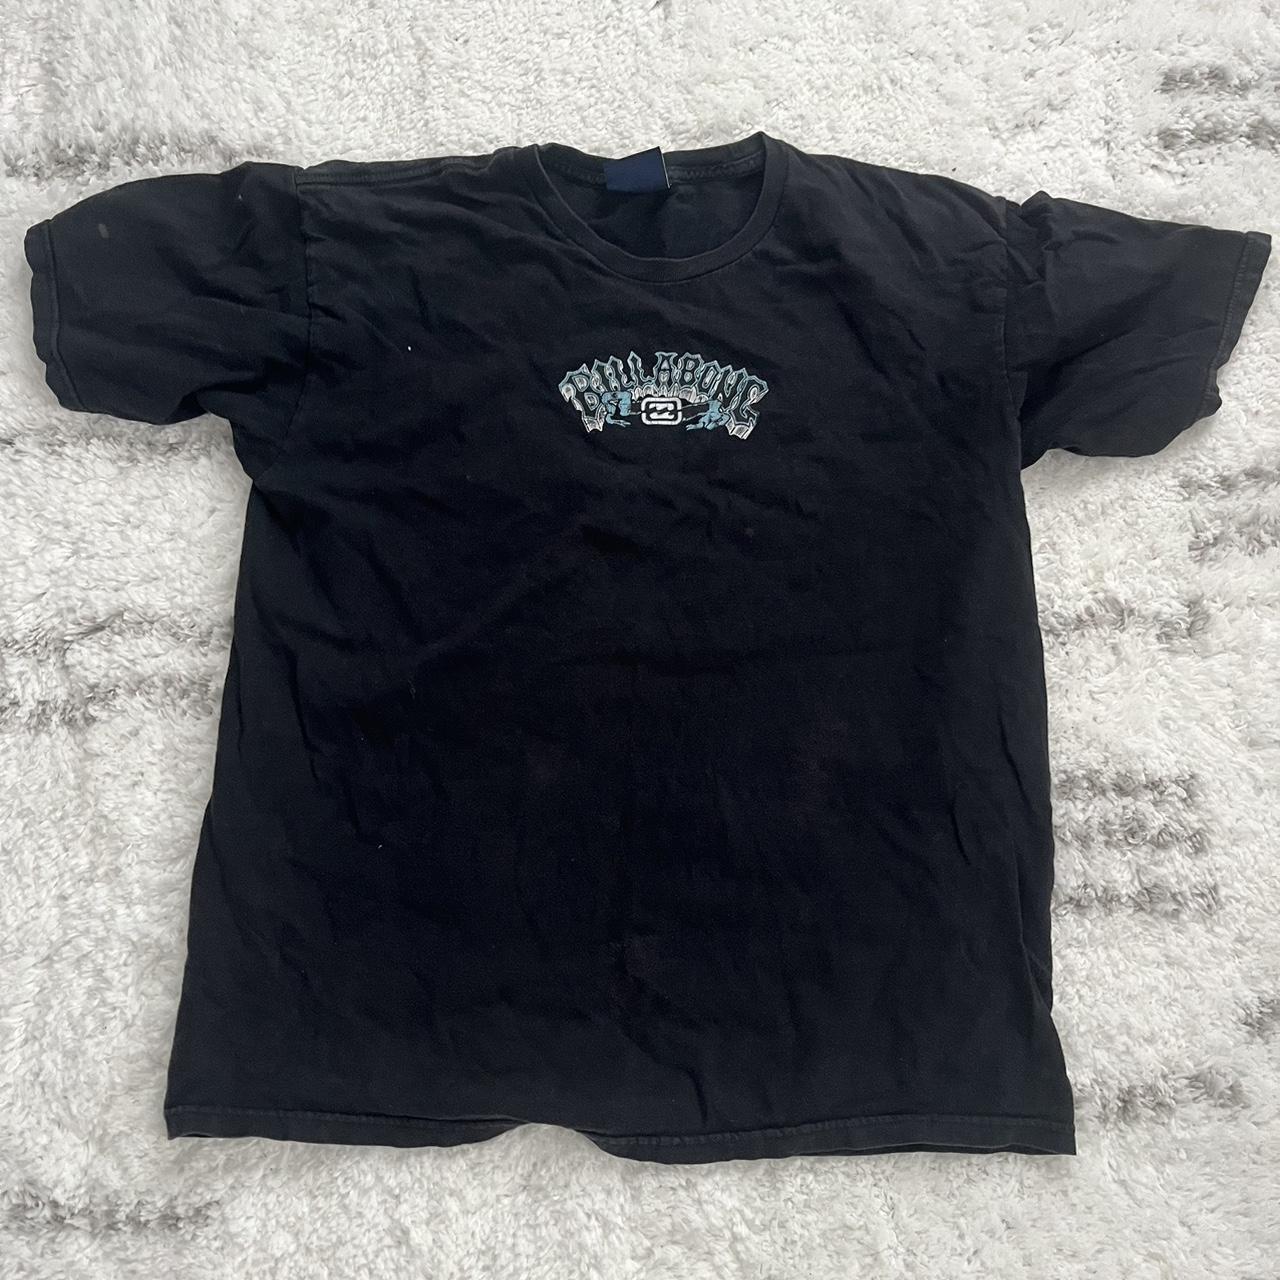 very nice t goes great with anything (US SHIPPING) - Depop